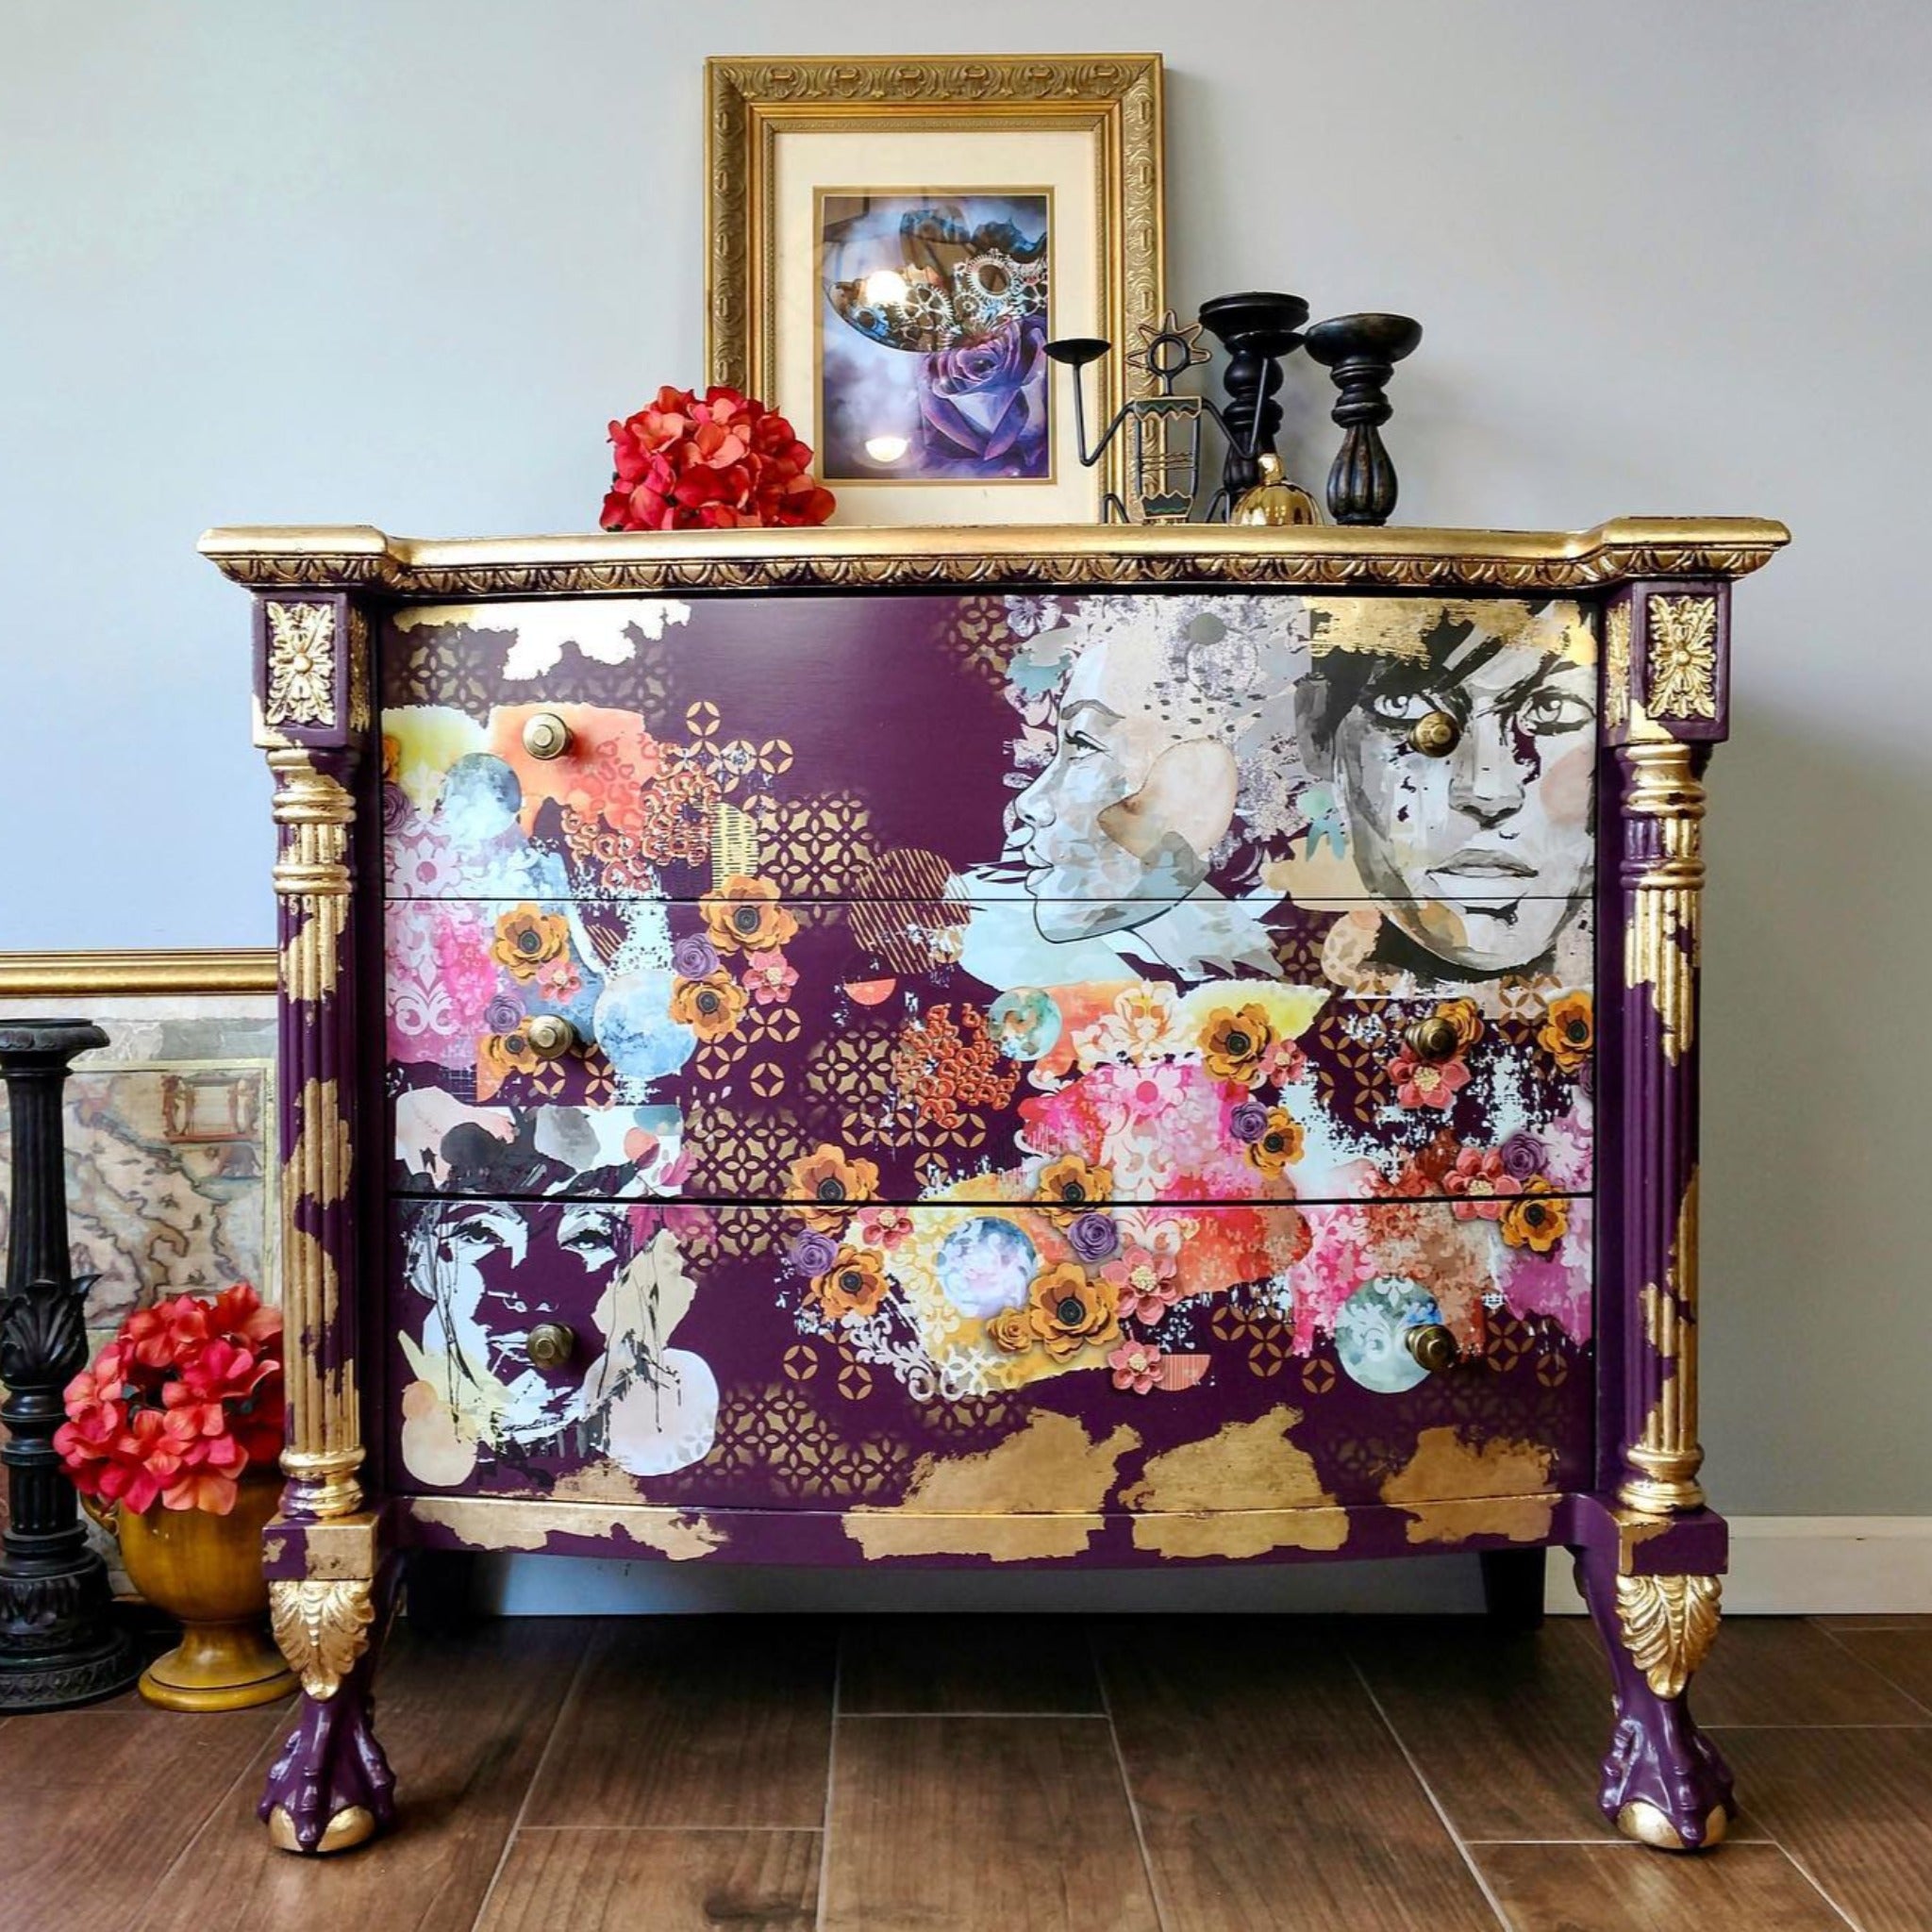 A vintage 3-drawer dresser is painted royal purple with gold accents and features ReDesign with Prima's Abstract Beauty tissue paper on its drawers. 